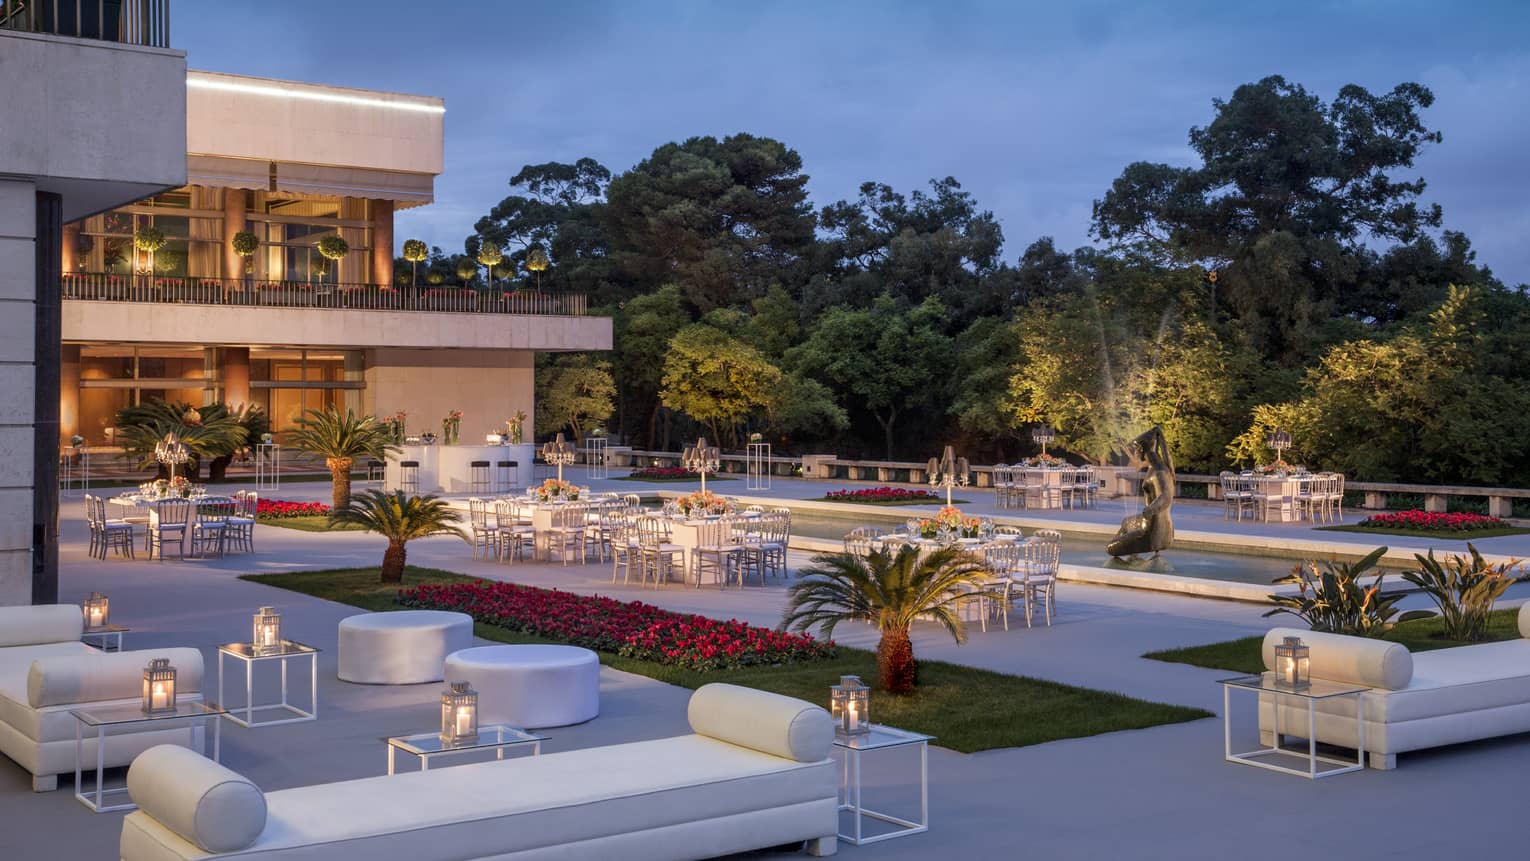 Modern white patio lounge furniture, tables, potted palms surrounding fountain at dusk